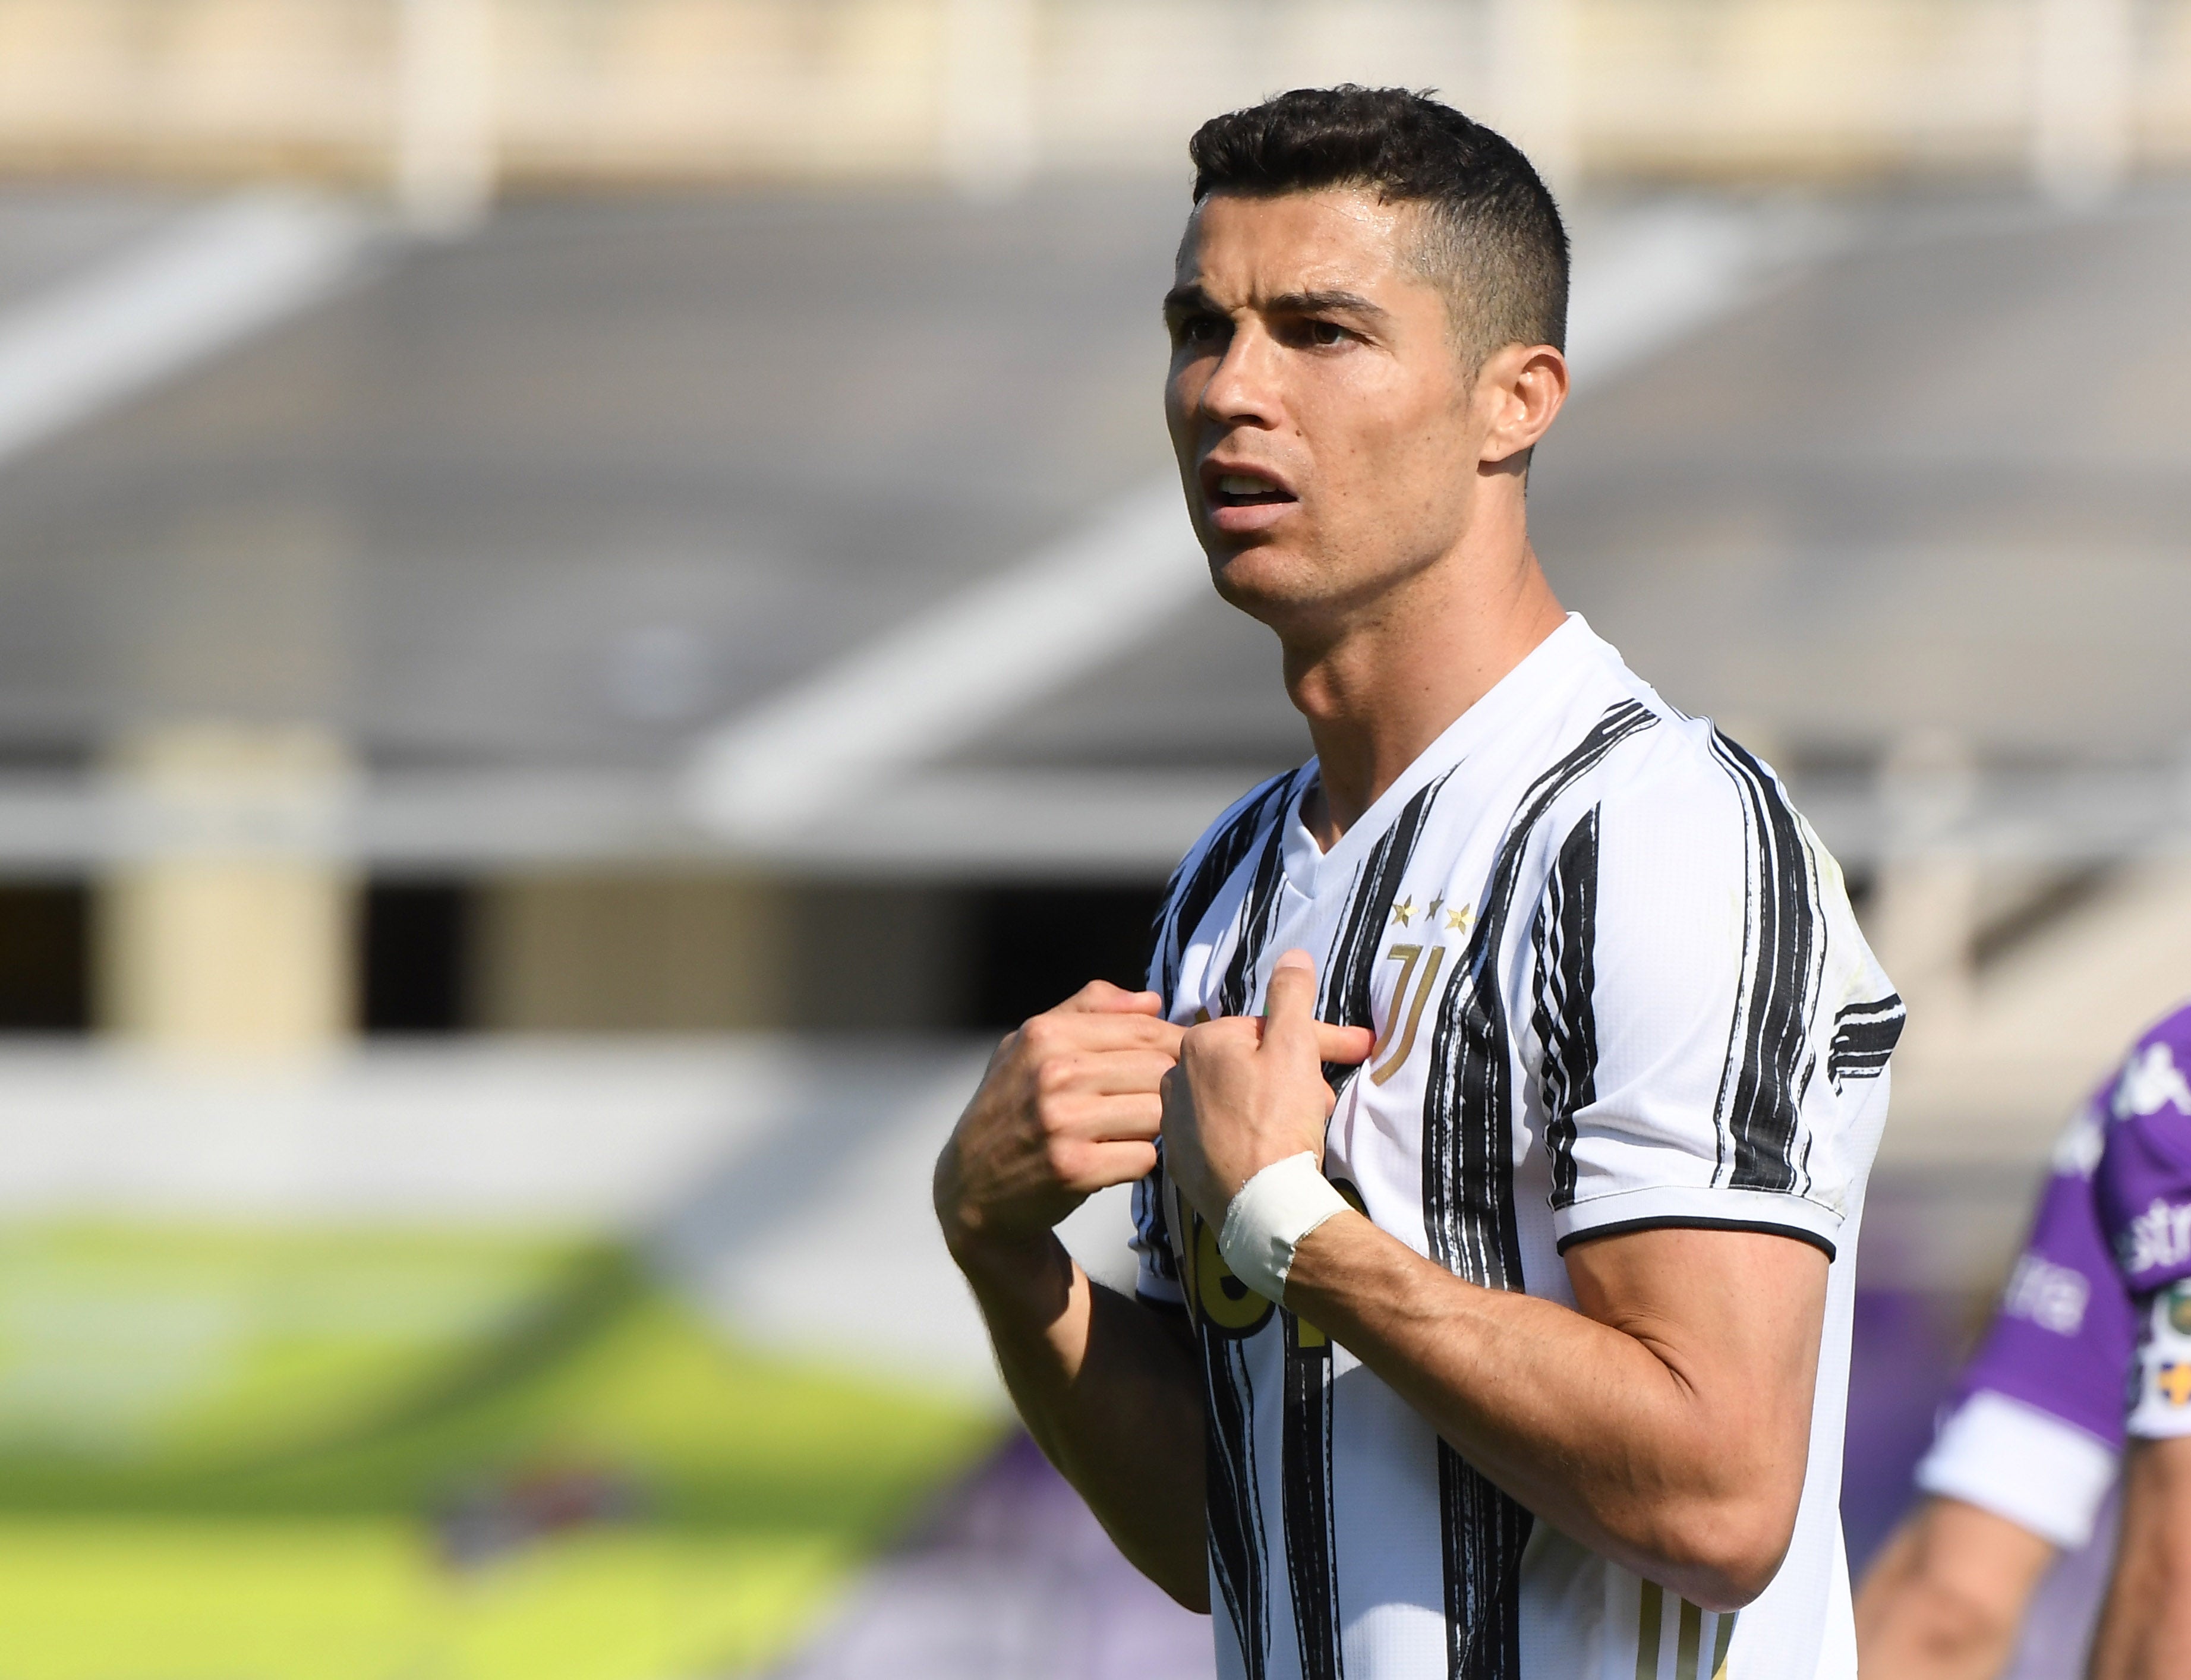 Cristiano Ronaldo denies the allegation of sexual assault